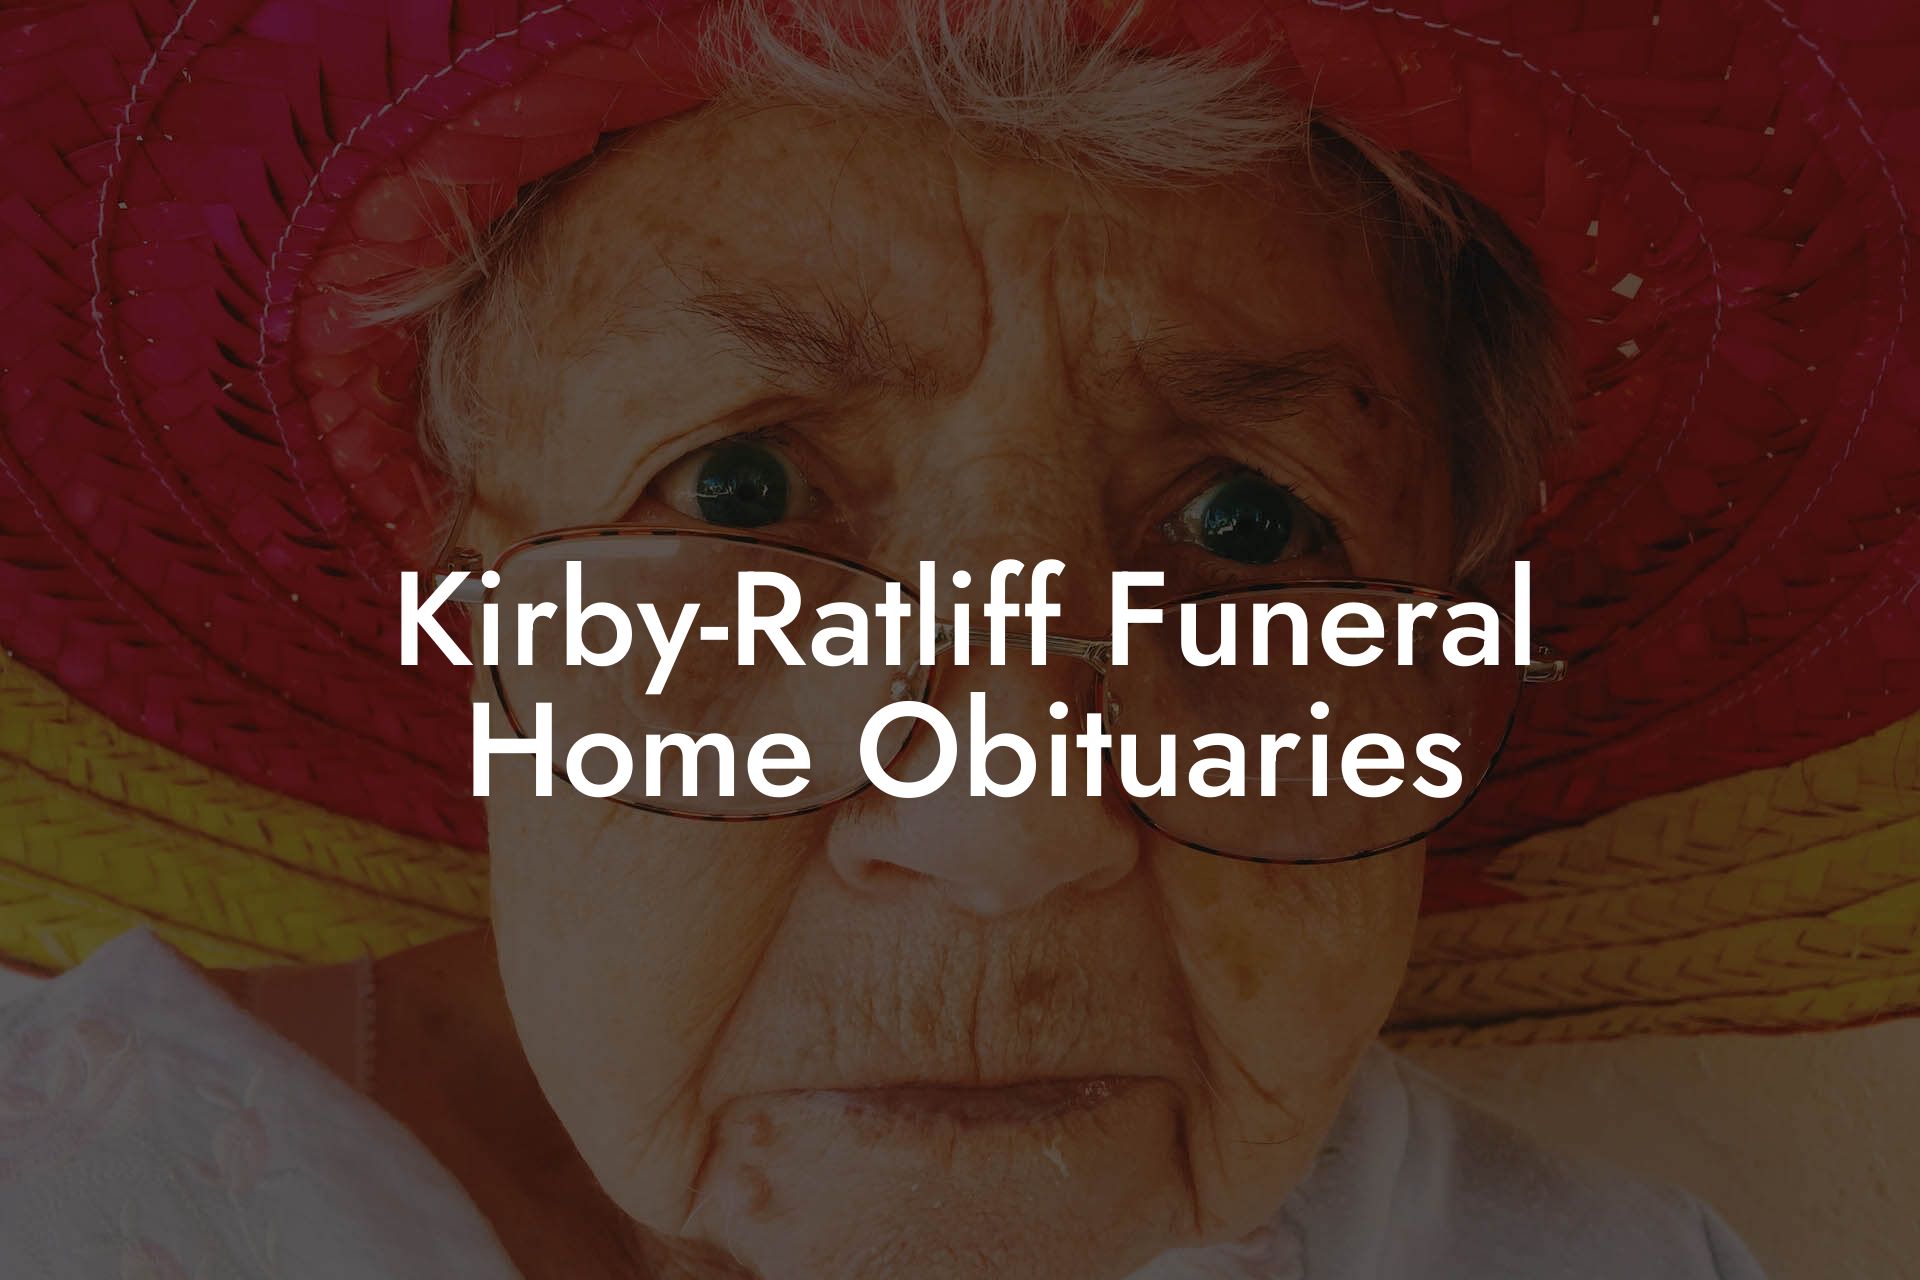 Kirby-Ratliff Funeral Home Obituaries